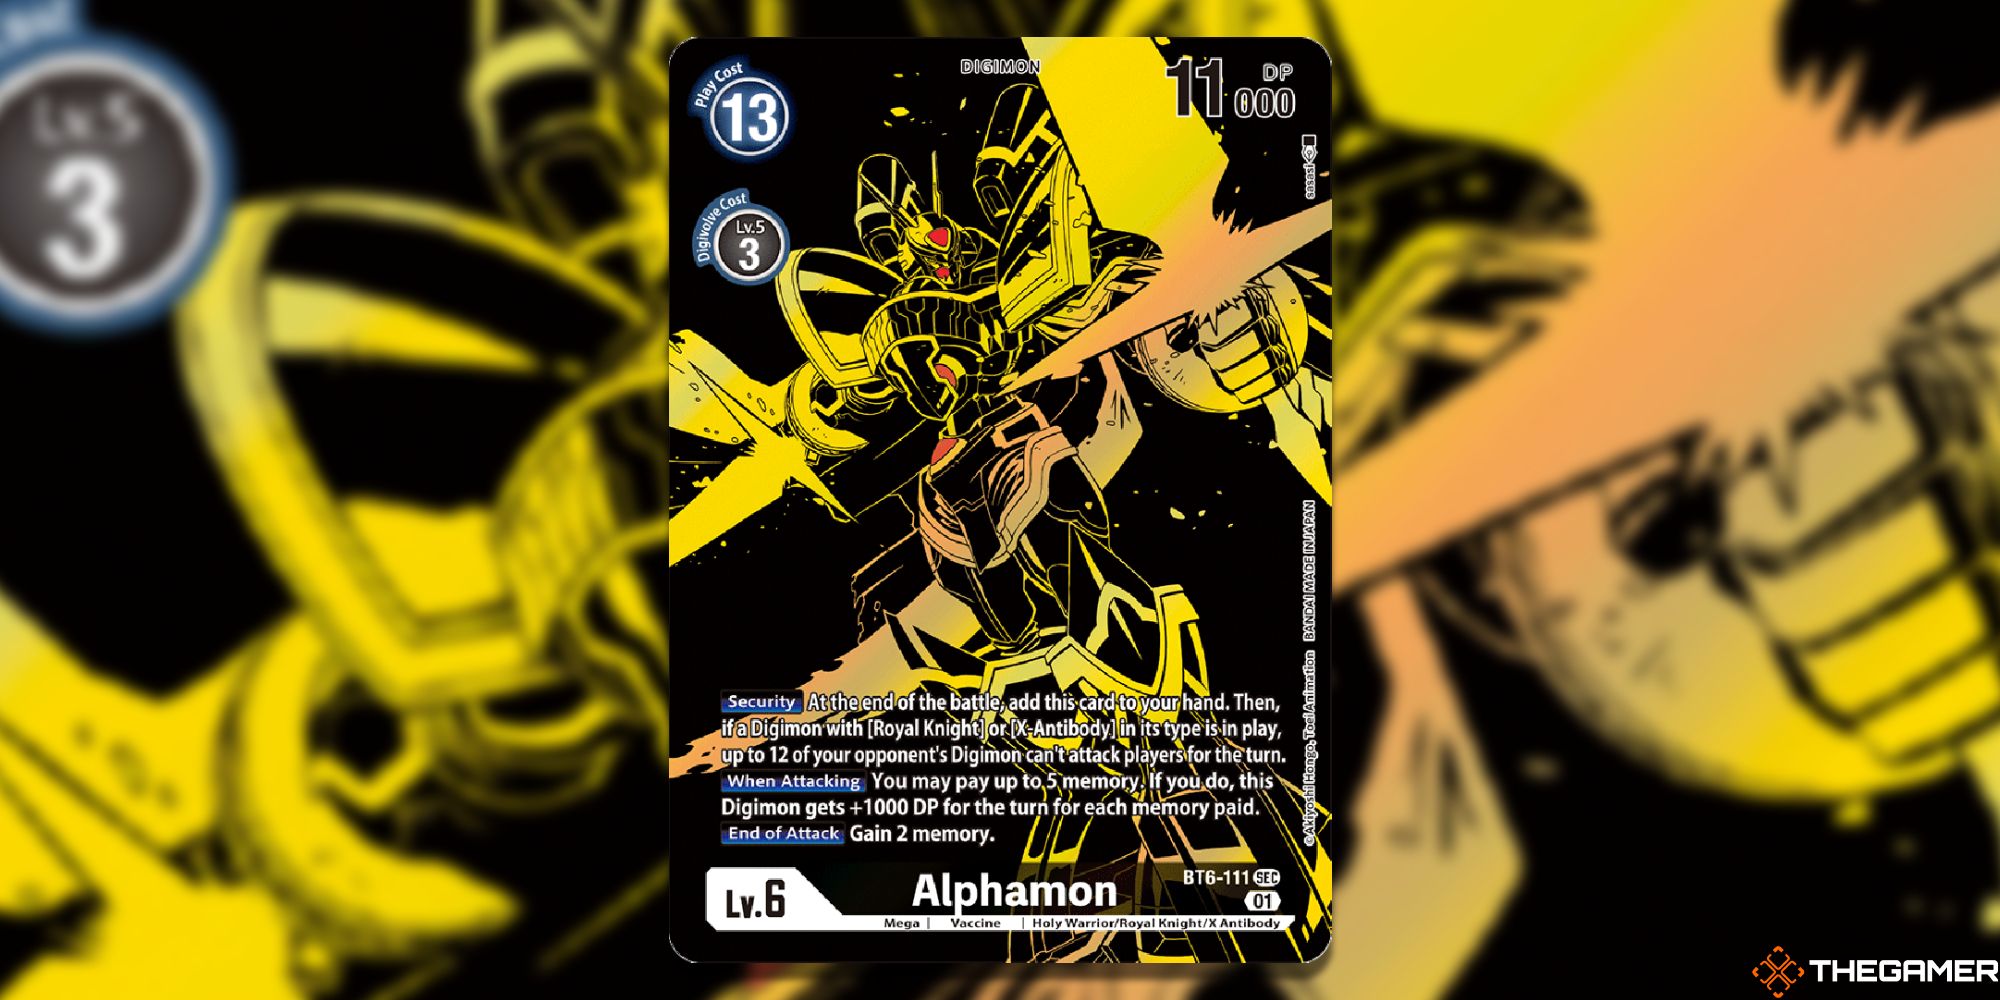 ghost rare alphamon card from digimon card game with blur background